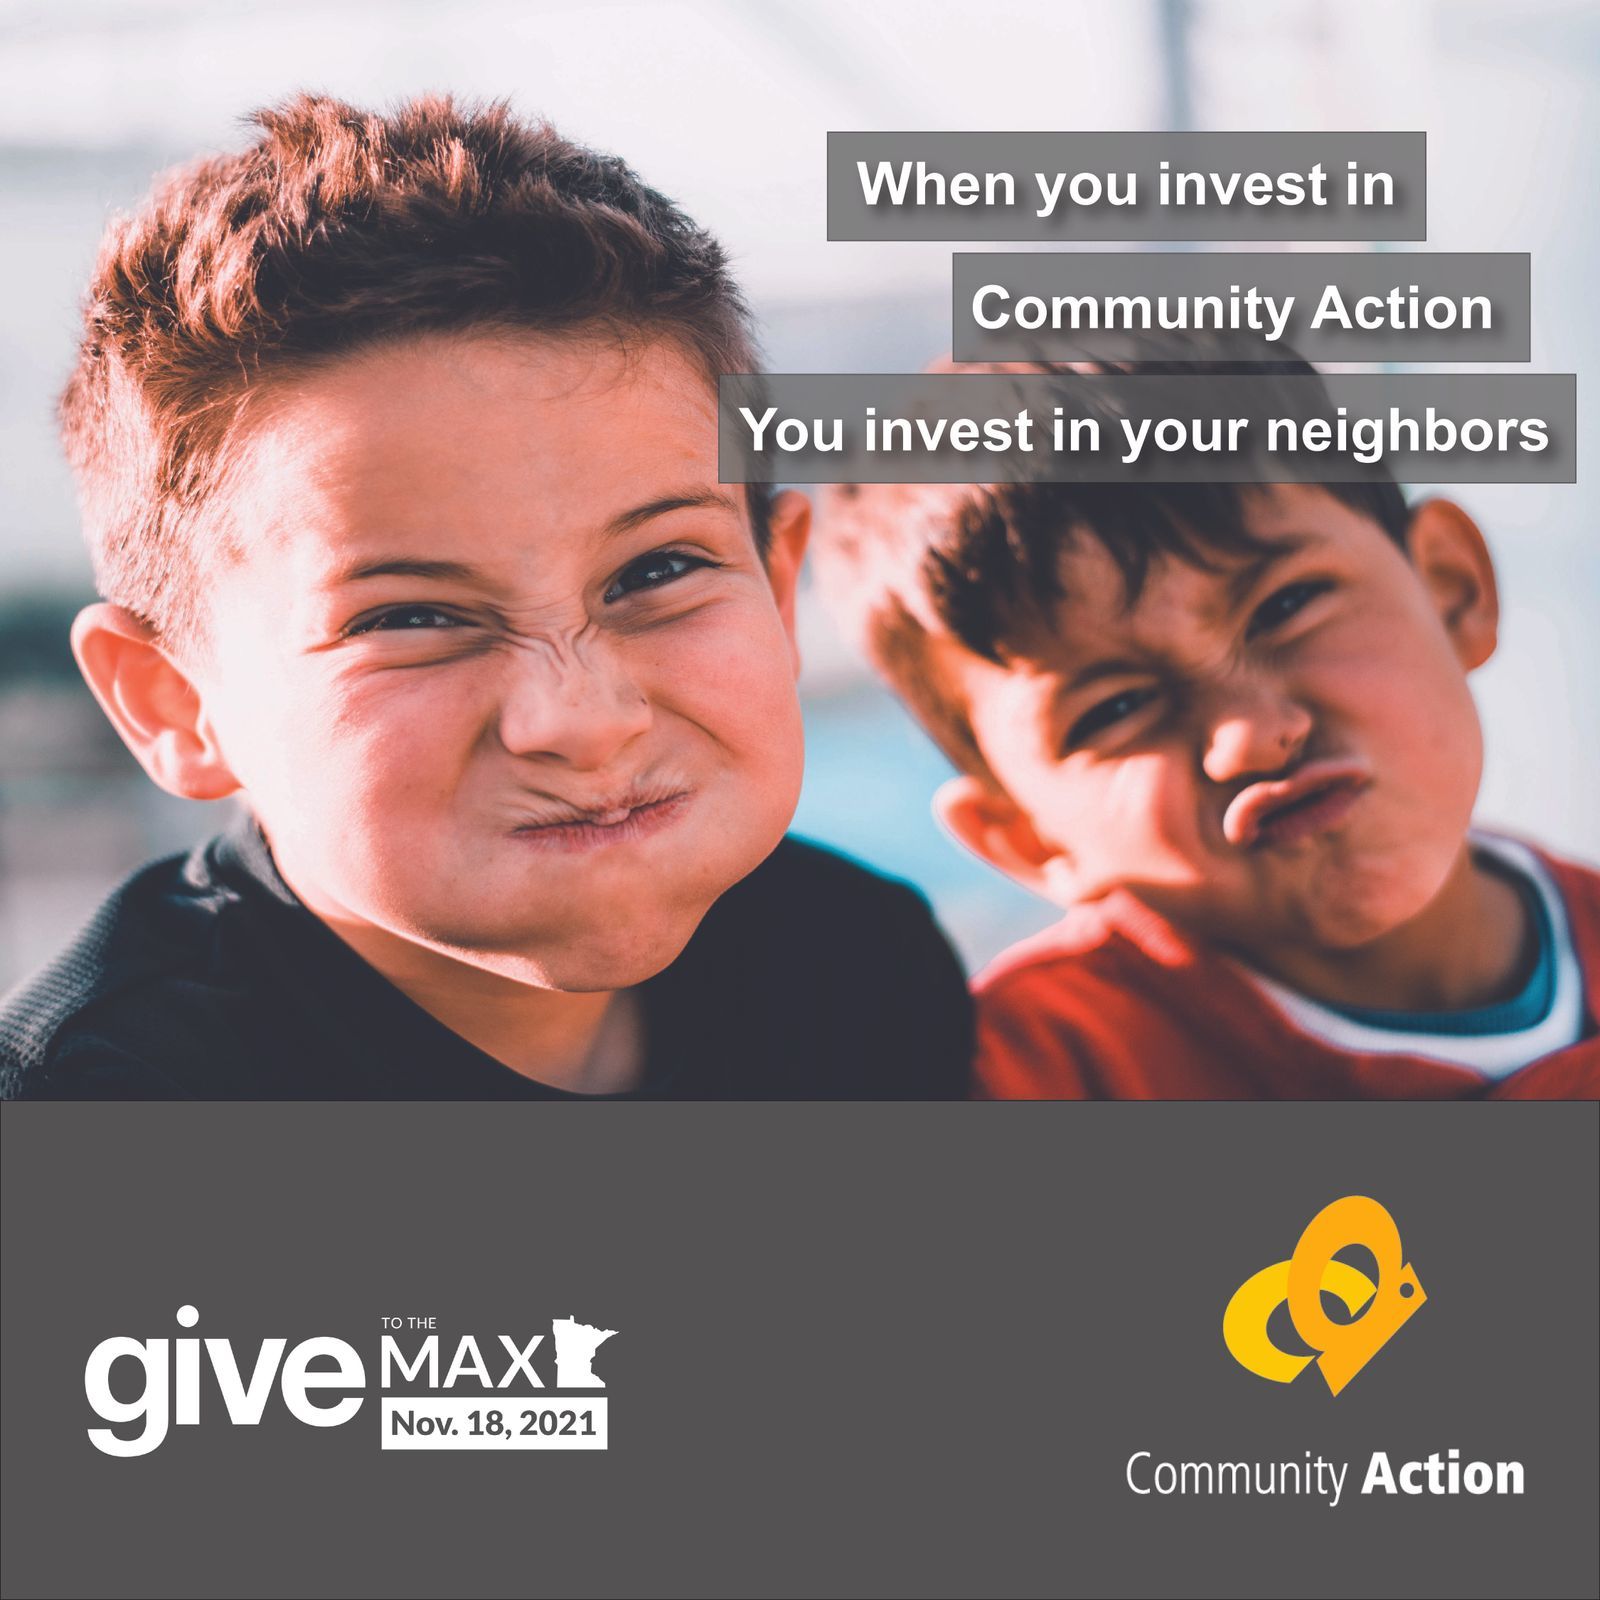 Give to the Max Day 2021 Just around the Corner